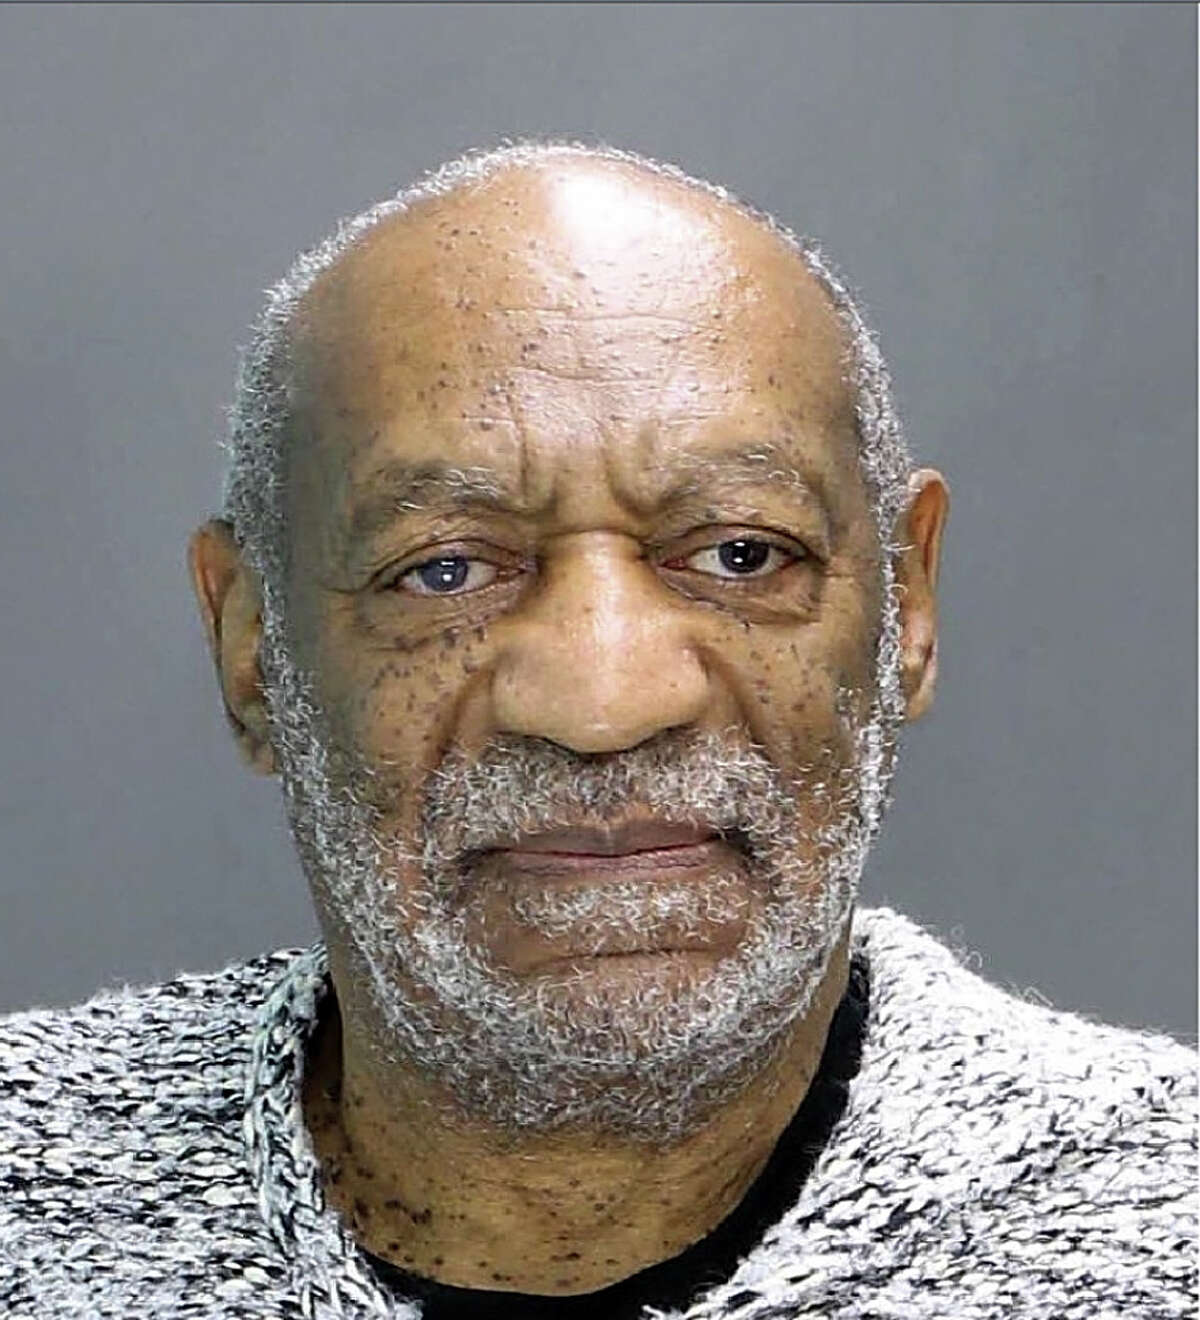 Bill Cosby This shot was taken when Cosby turned himself in on a charge of aggravated indecent assault for an alleged encounter in 2004. At least 35 women have accused Cosby of assaulting them.